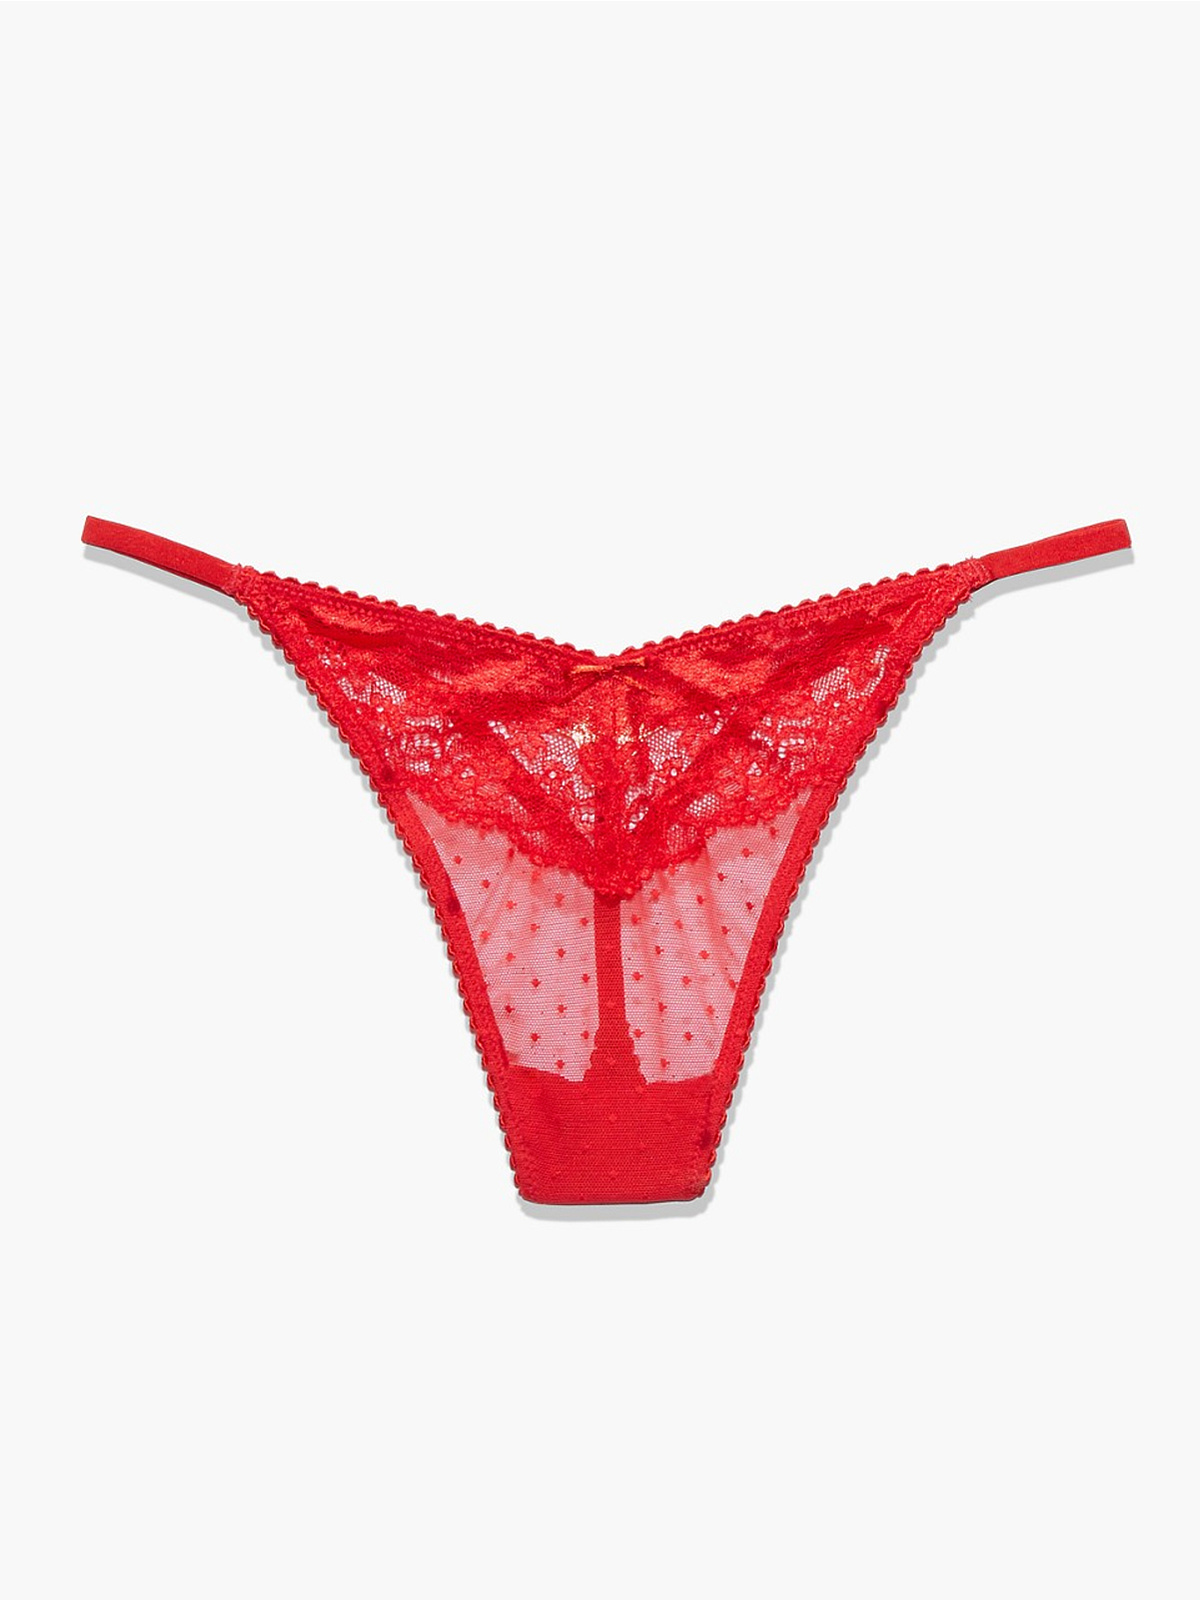 Candy Hearts Lace G-String